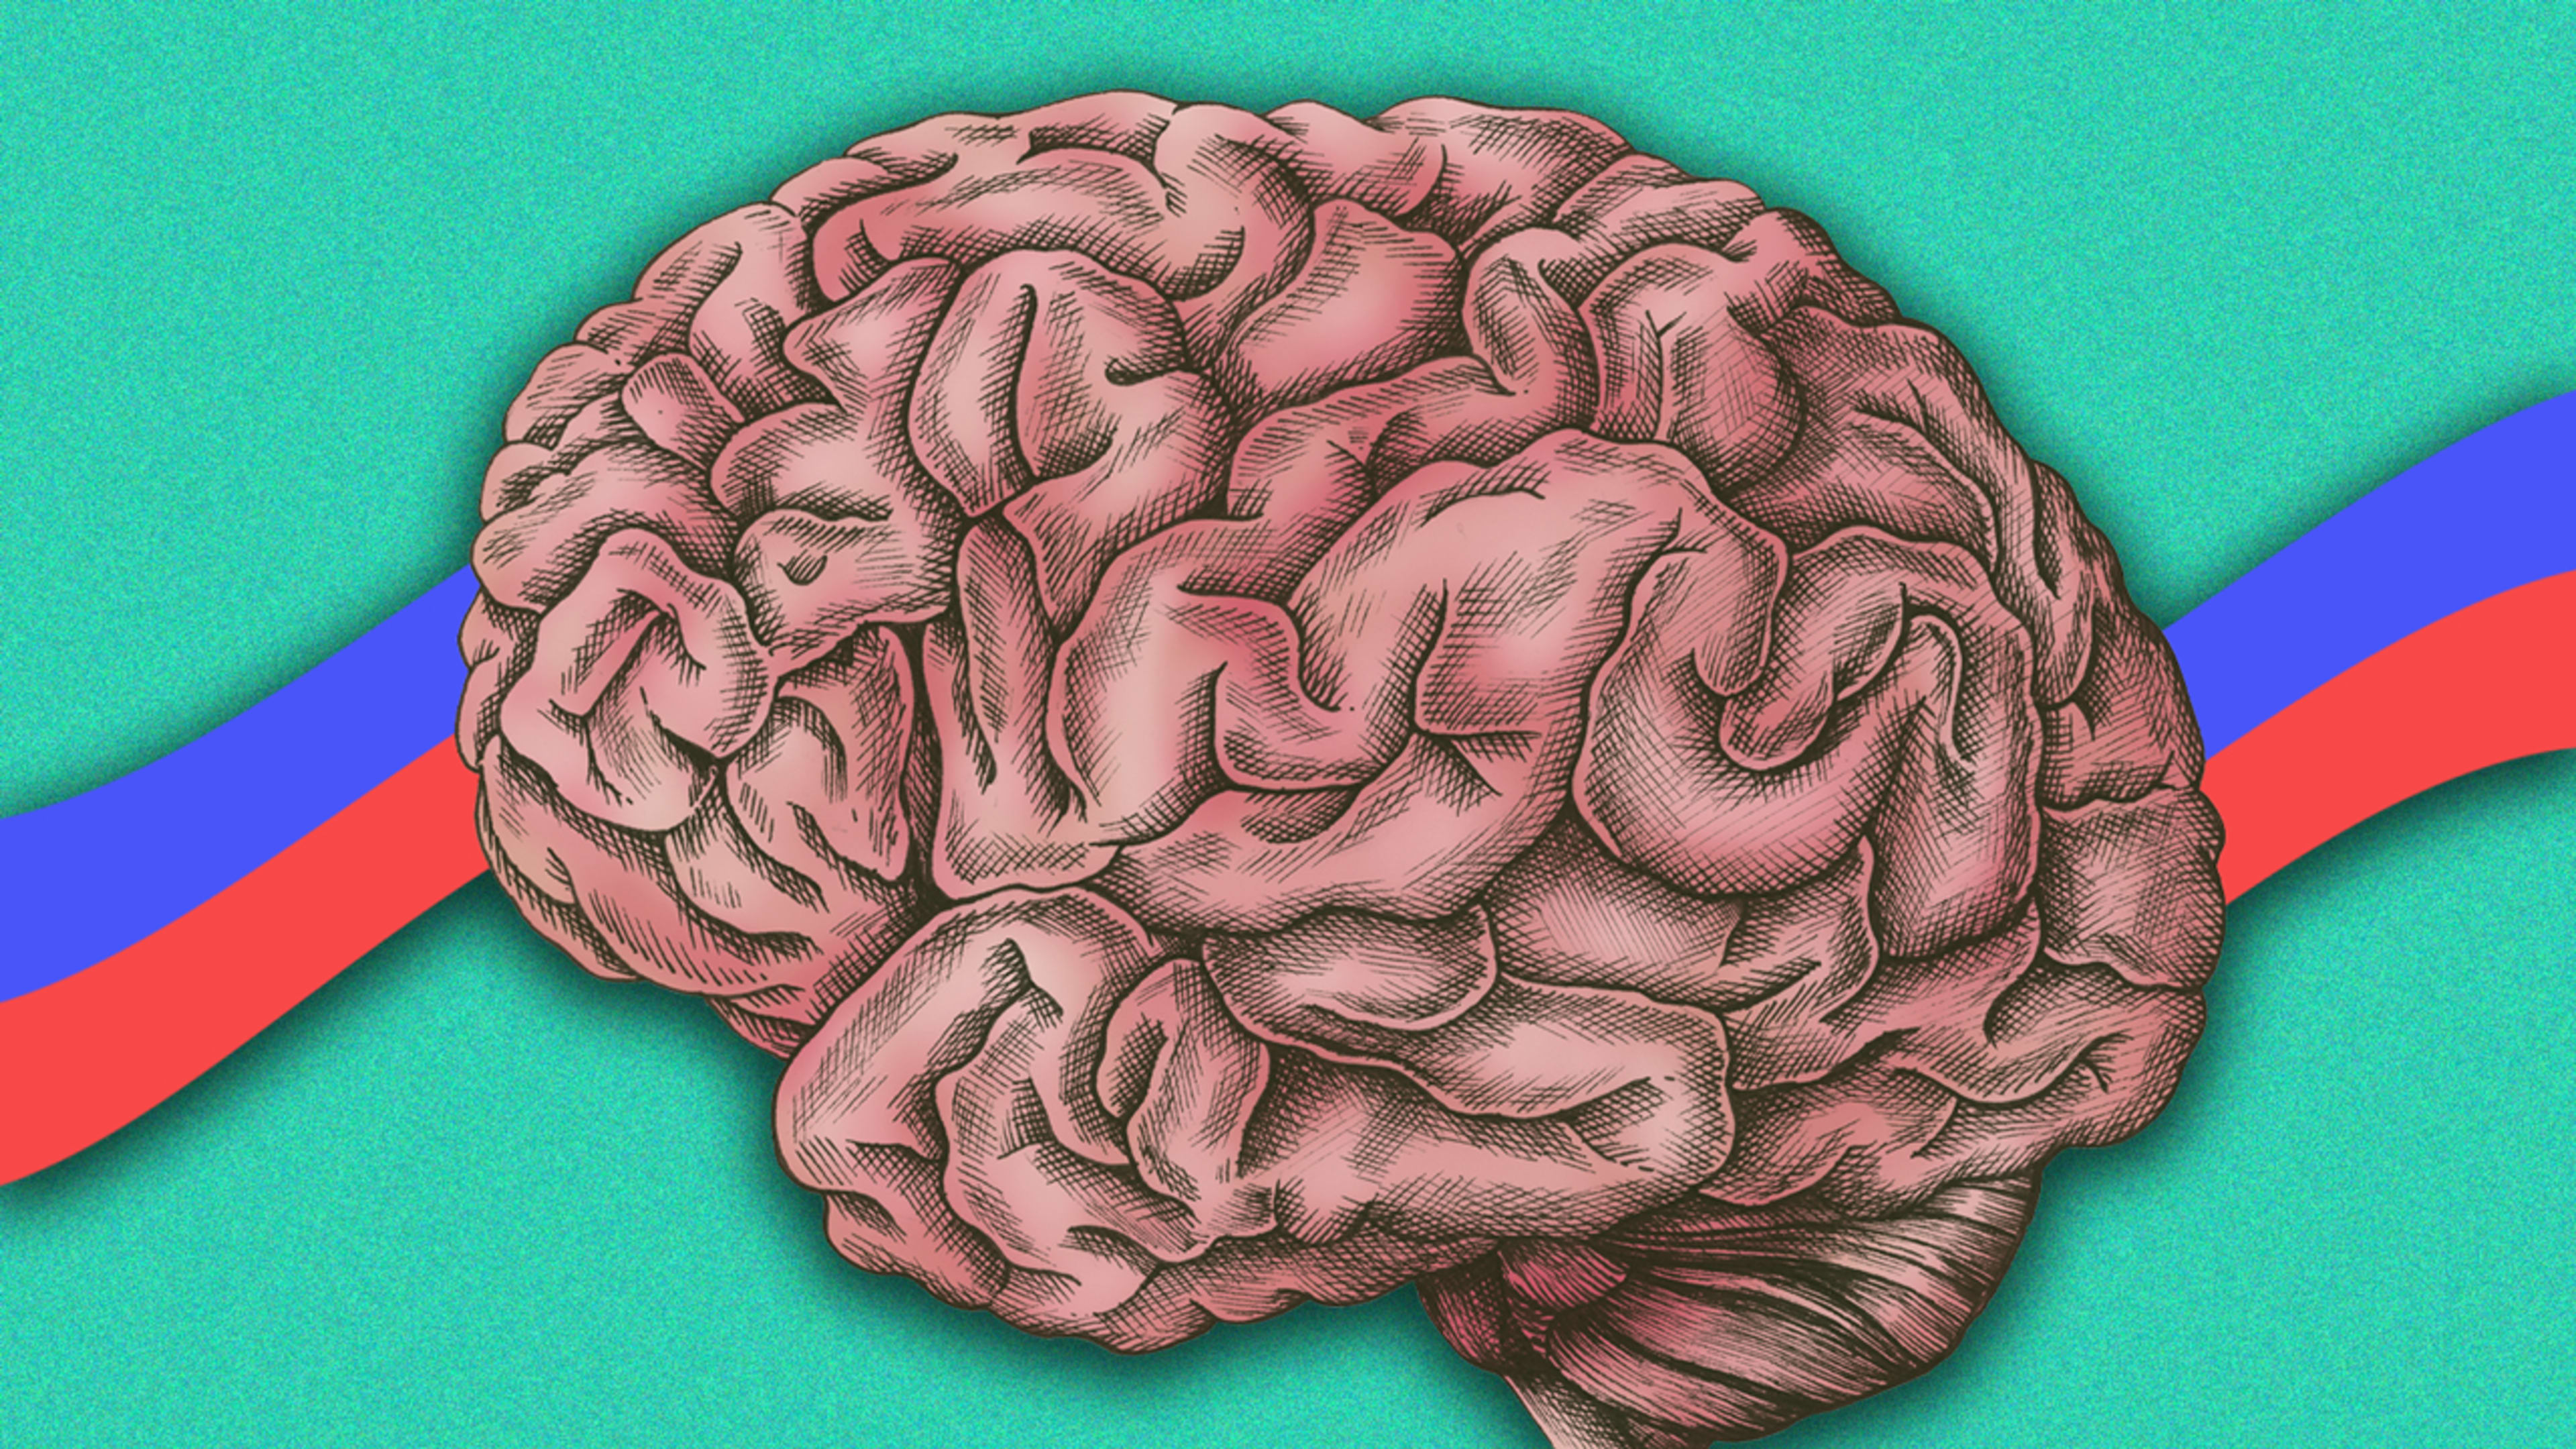 Politicians, take note: Unaffiliated voters have distinct brain patterns, MRI scans reveal